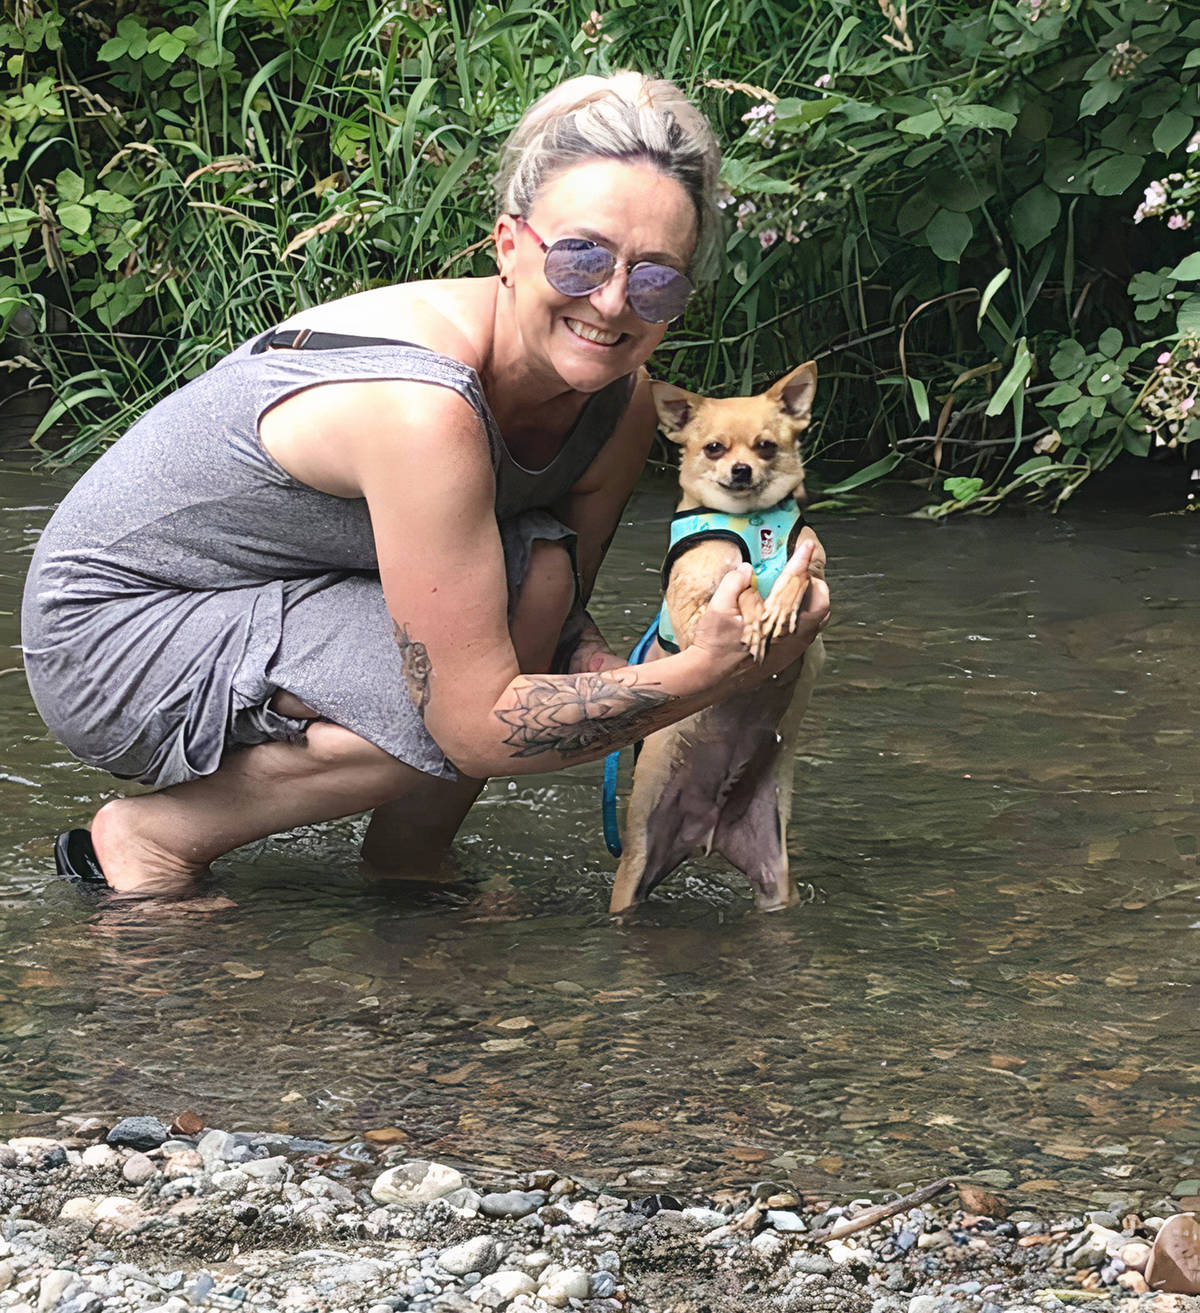 Walnut Grove resident Tricia Hill is hoping telling the story of how her dog Frankie, a two-and-a-half year-old Chihuahua was mauled to death by two pit bulls, will toughen dangerous dog regulations. (Special to Langley Advance Times)